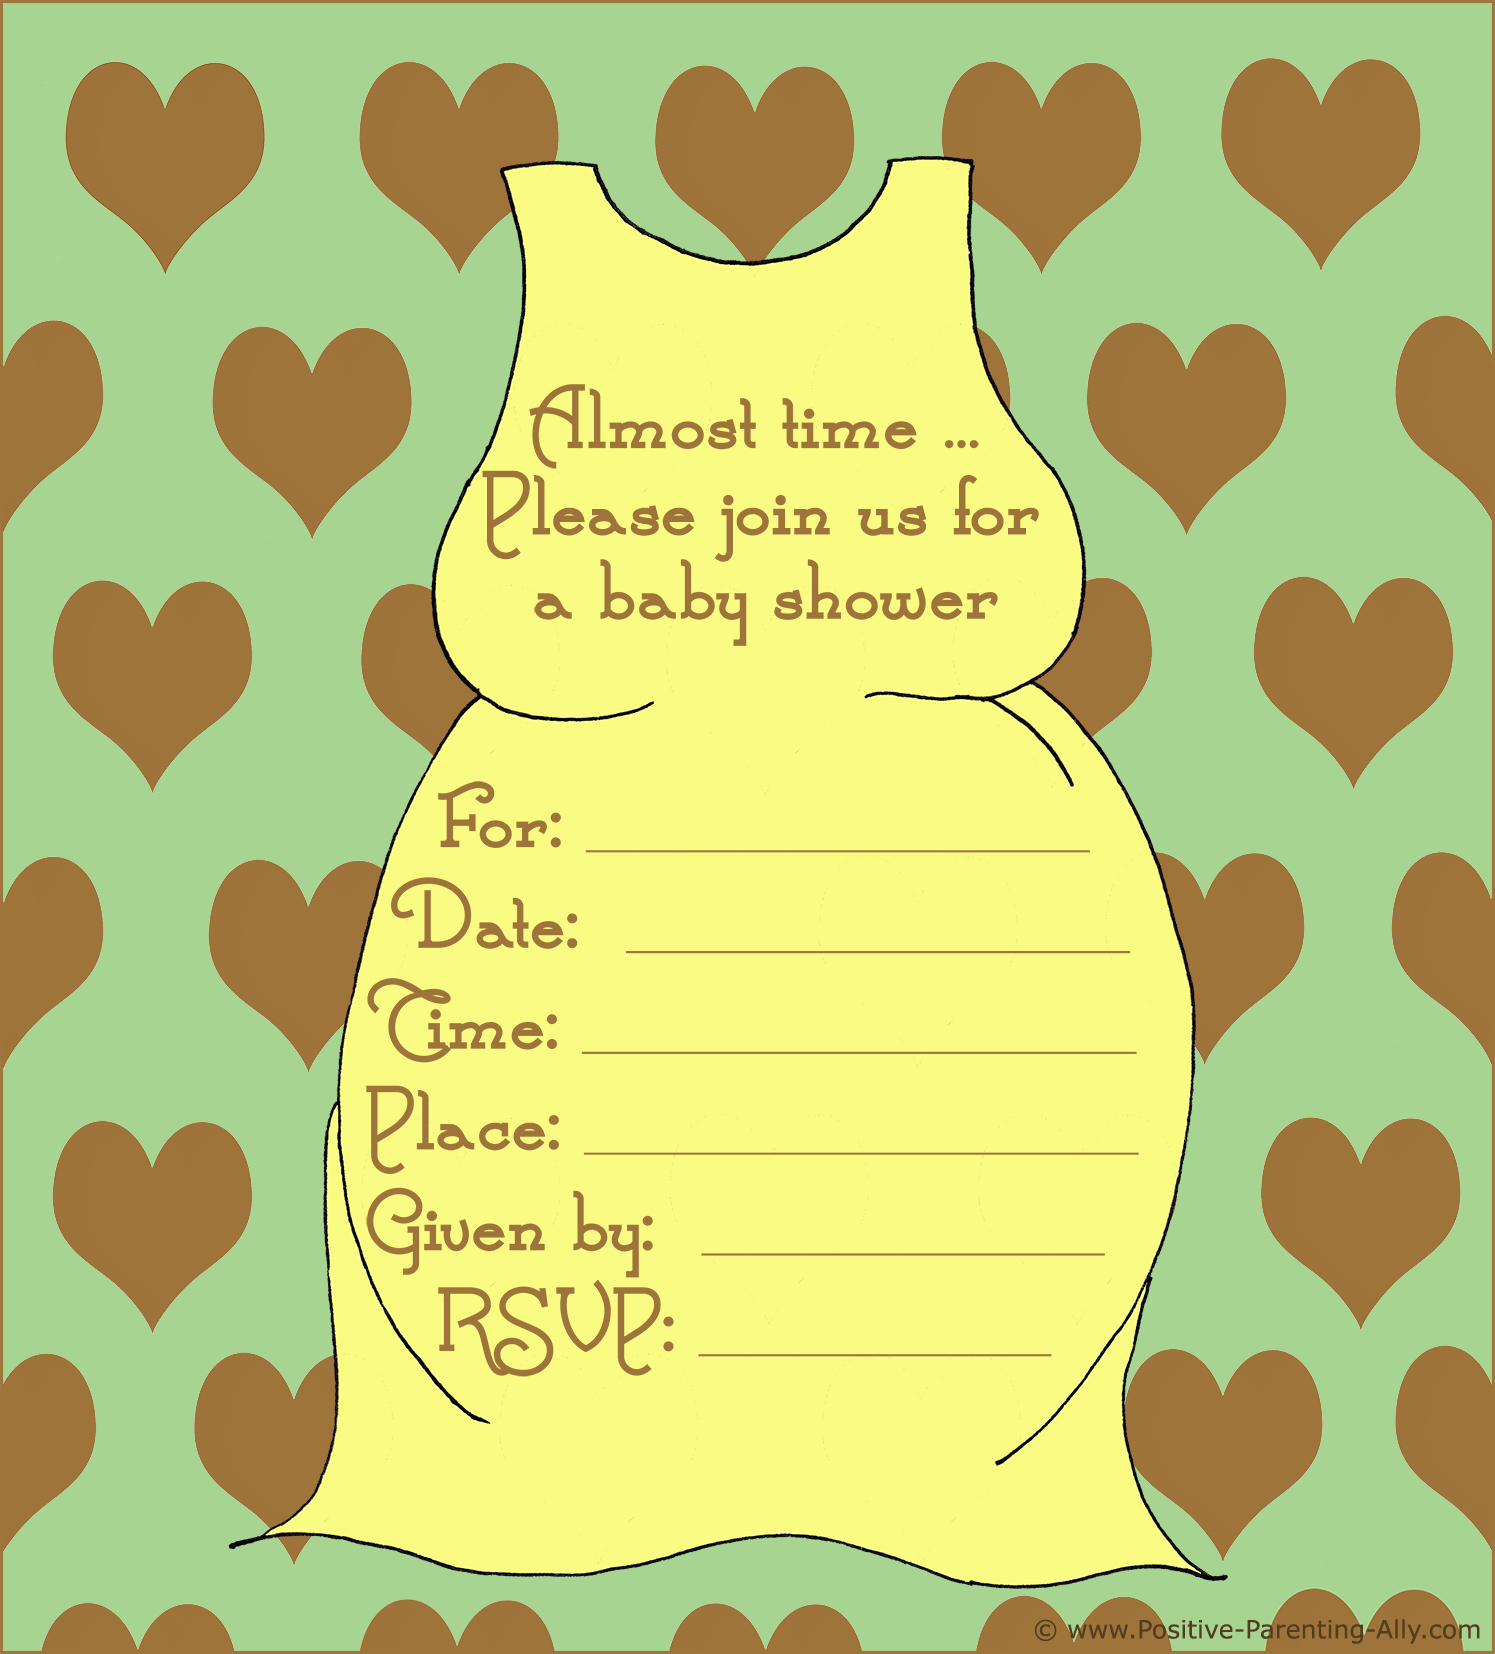 Free Printable Baby Shower Invitations In High Quality Resolution - Free Printable Blank Baby Shower Invitations